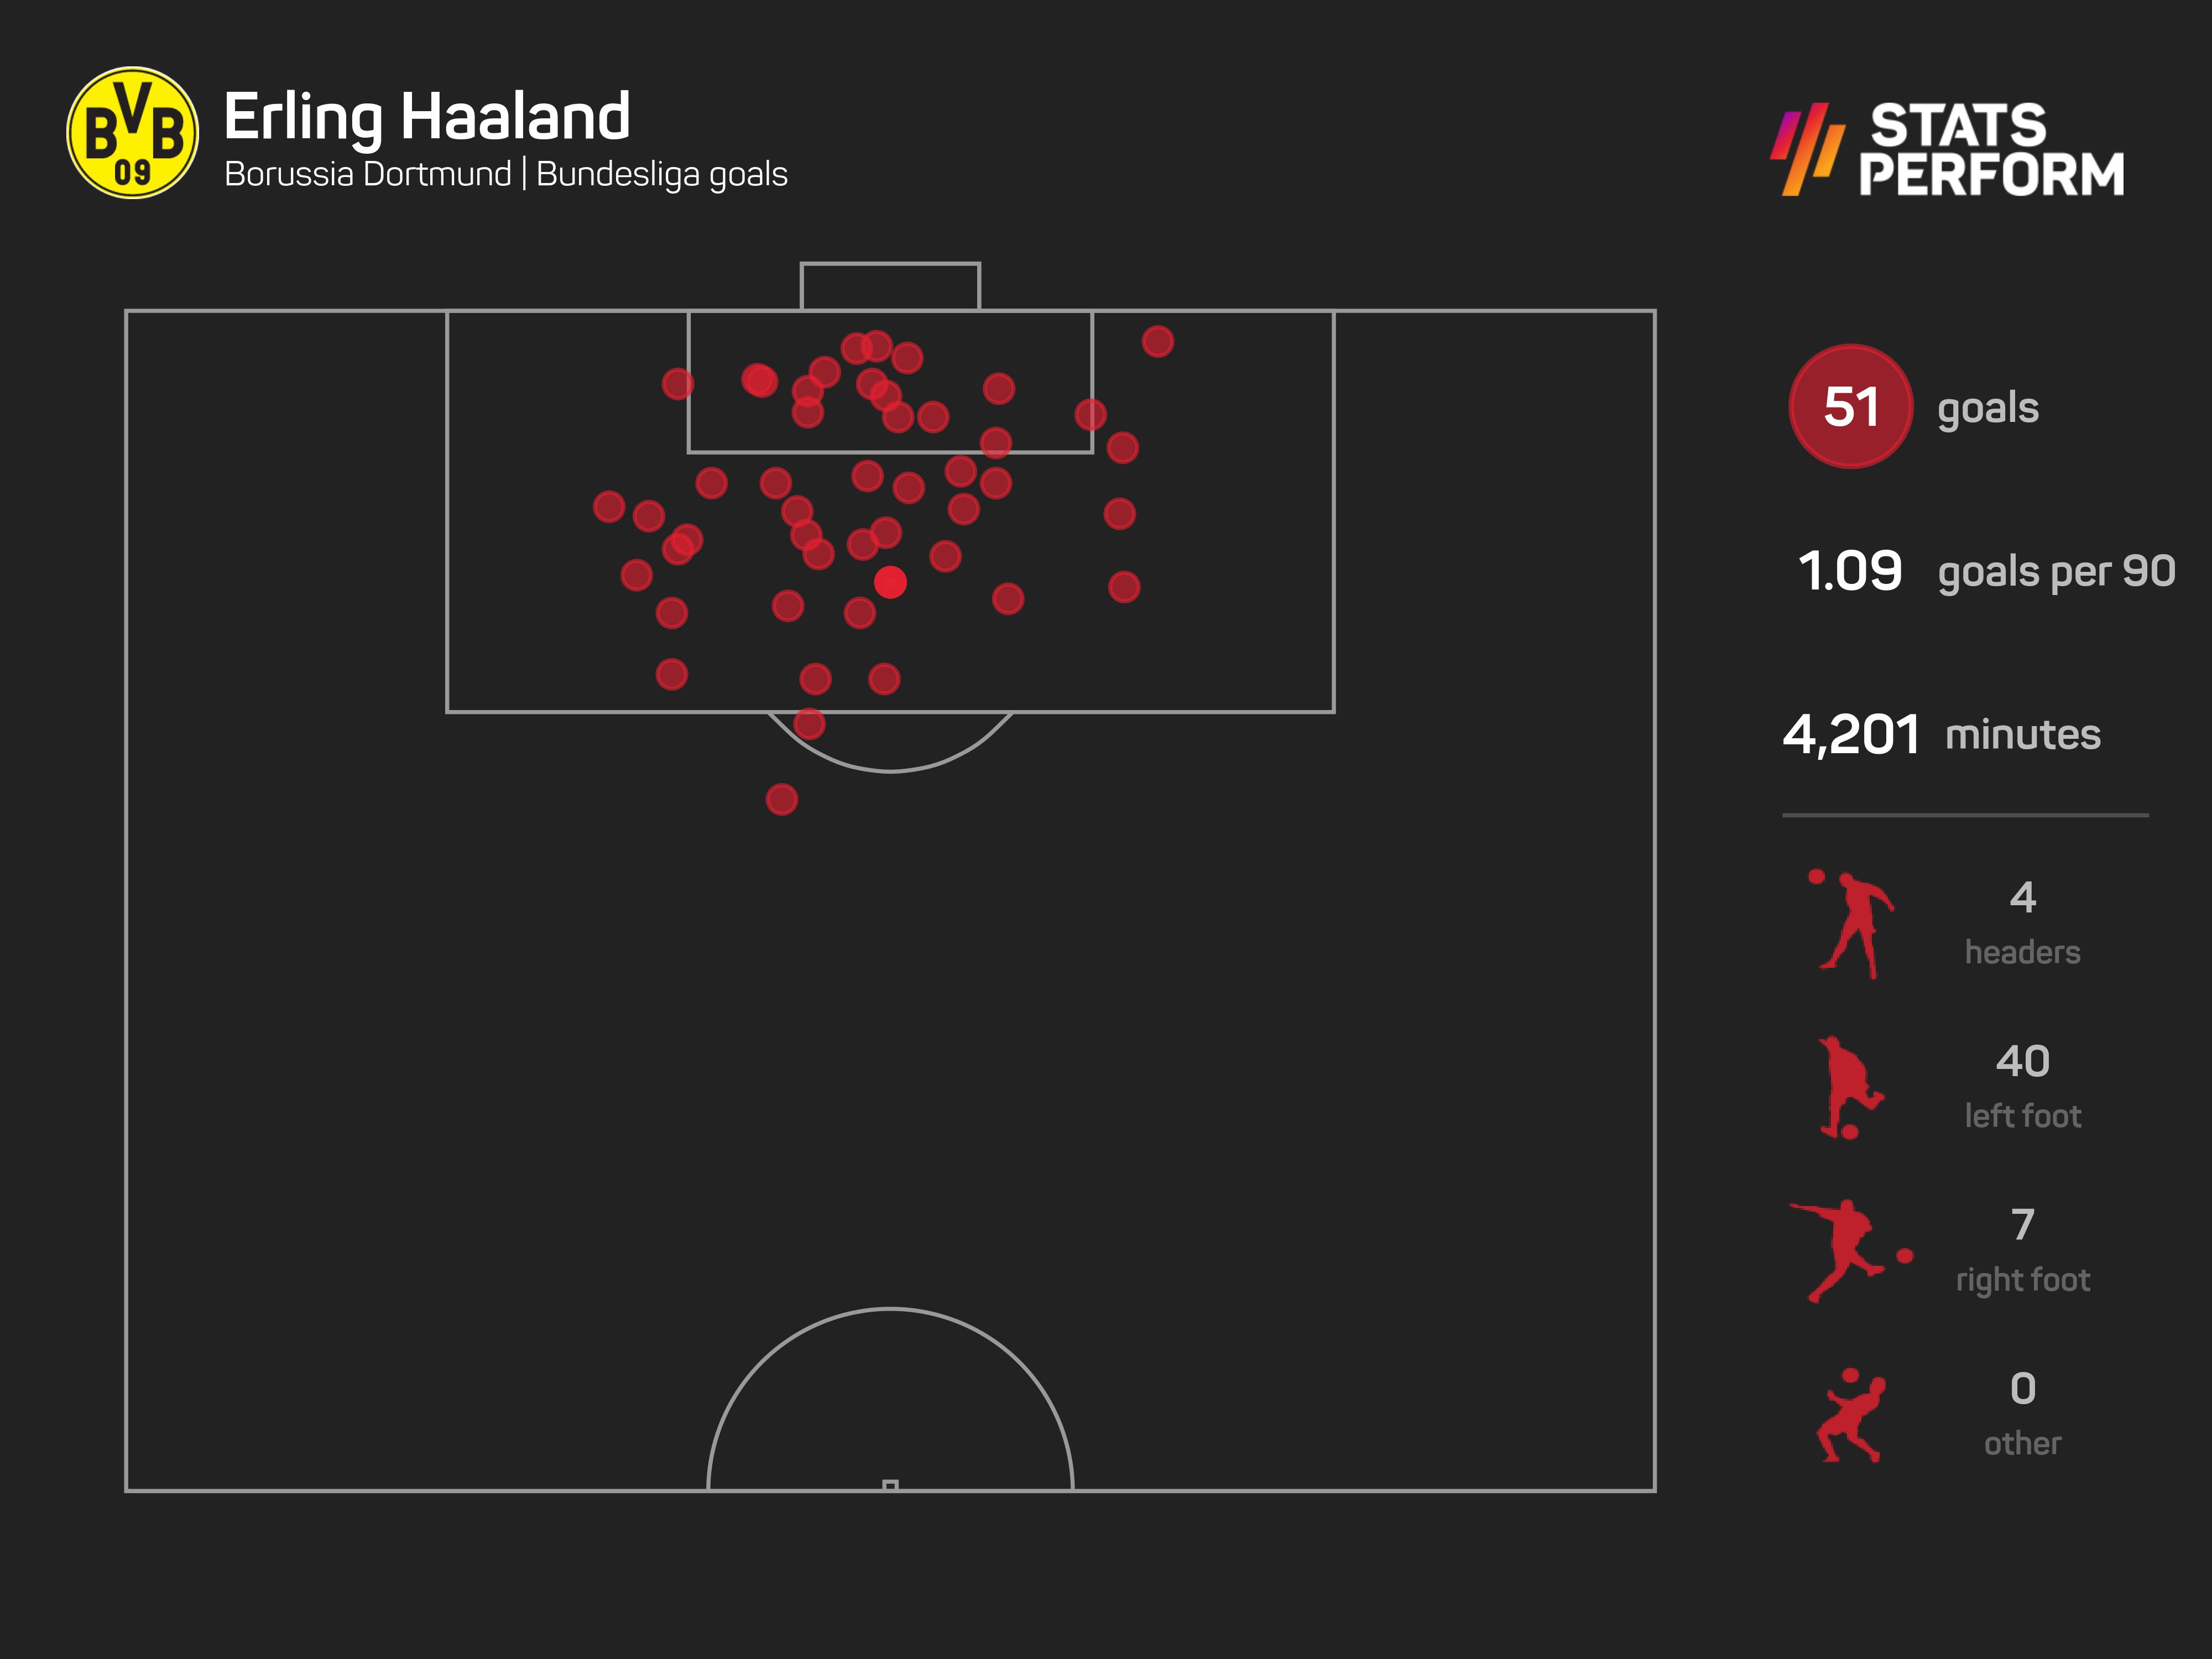 Erling Haaland's record in the Bundesliga is phenomenal